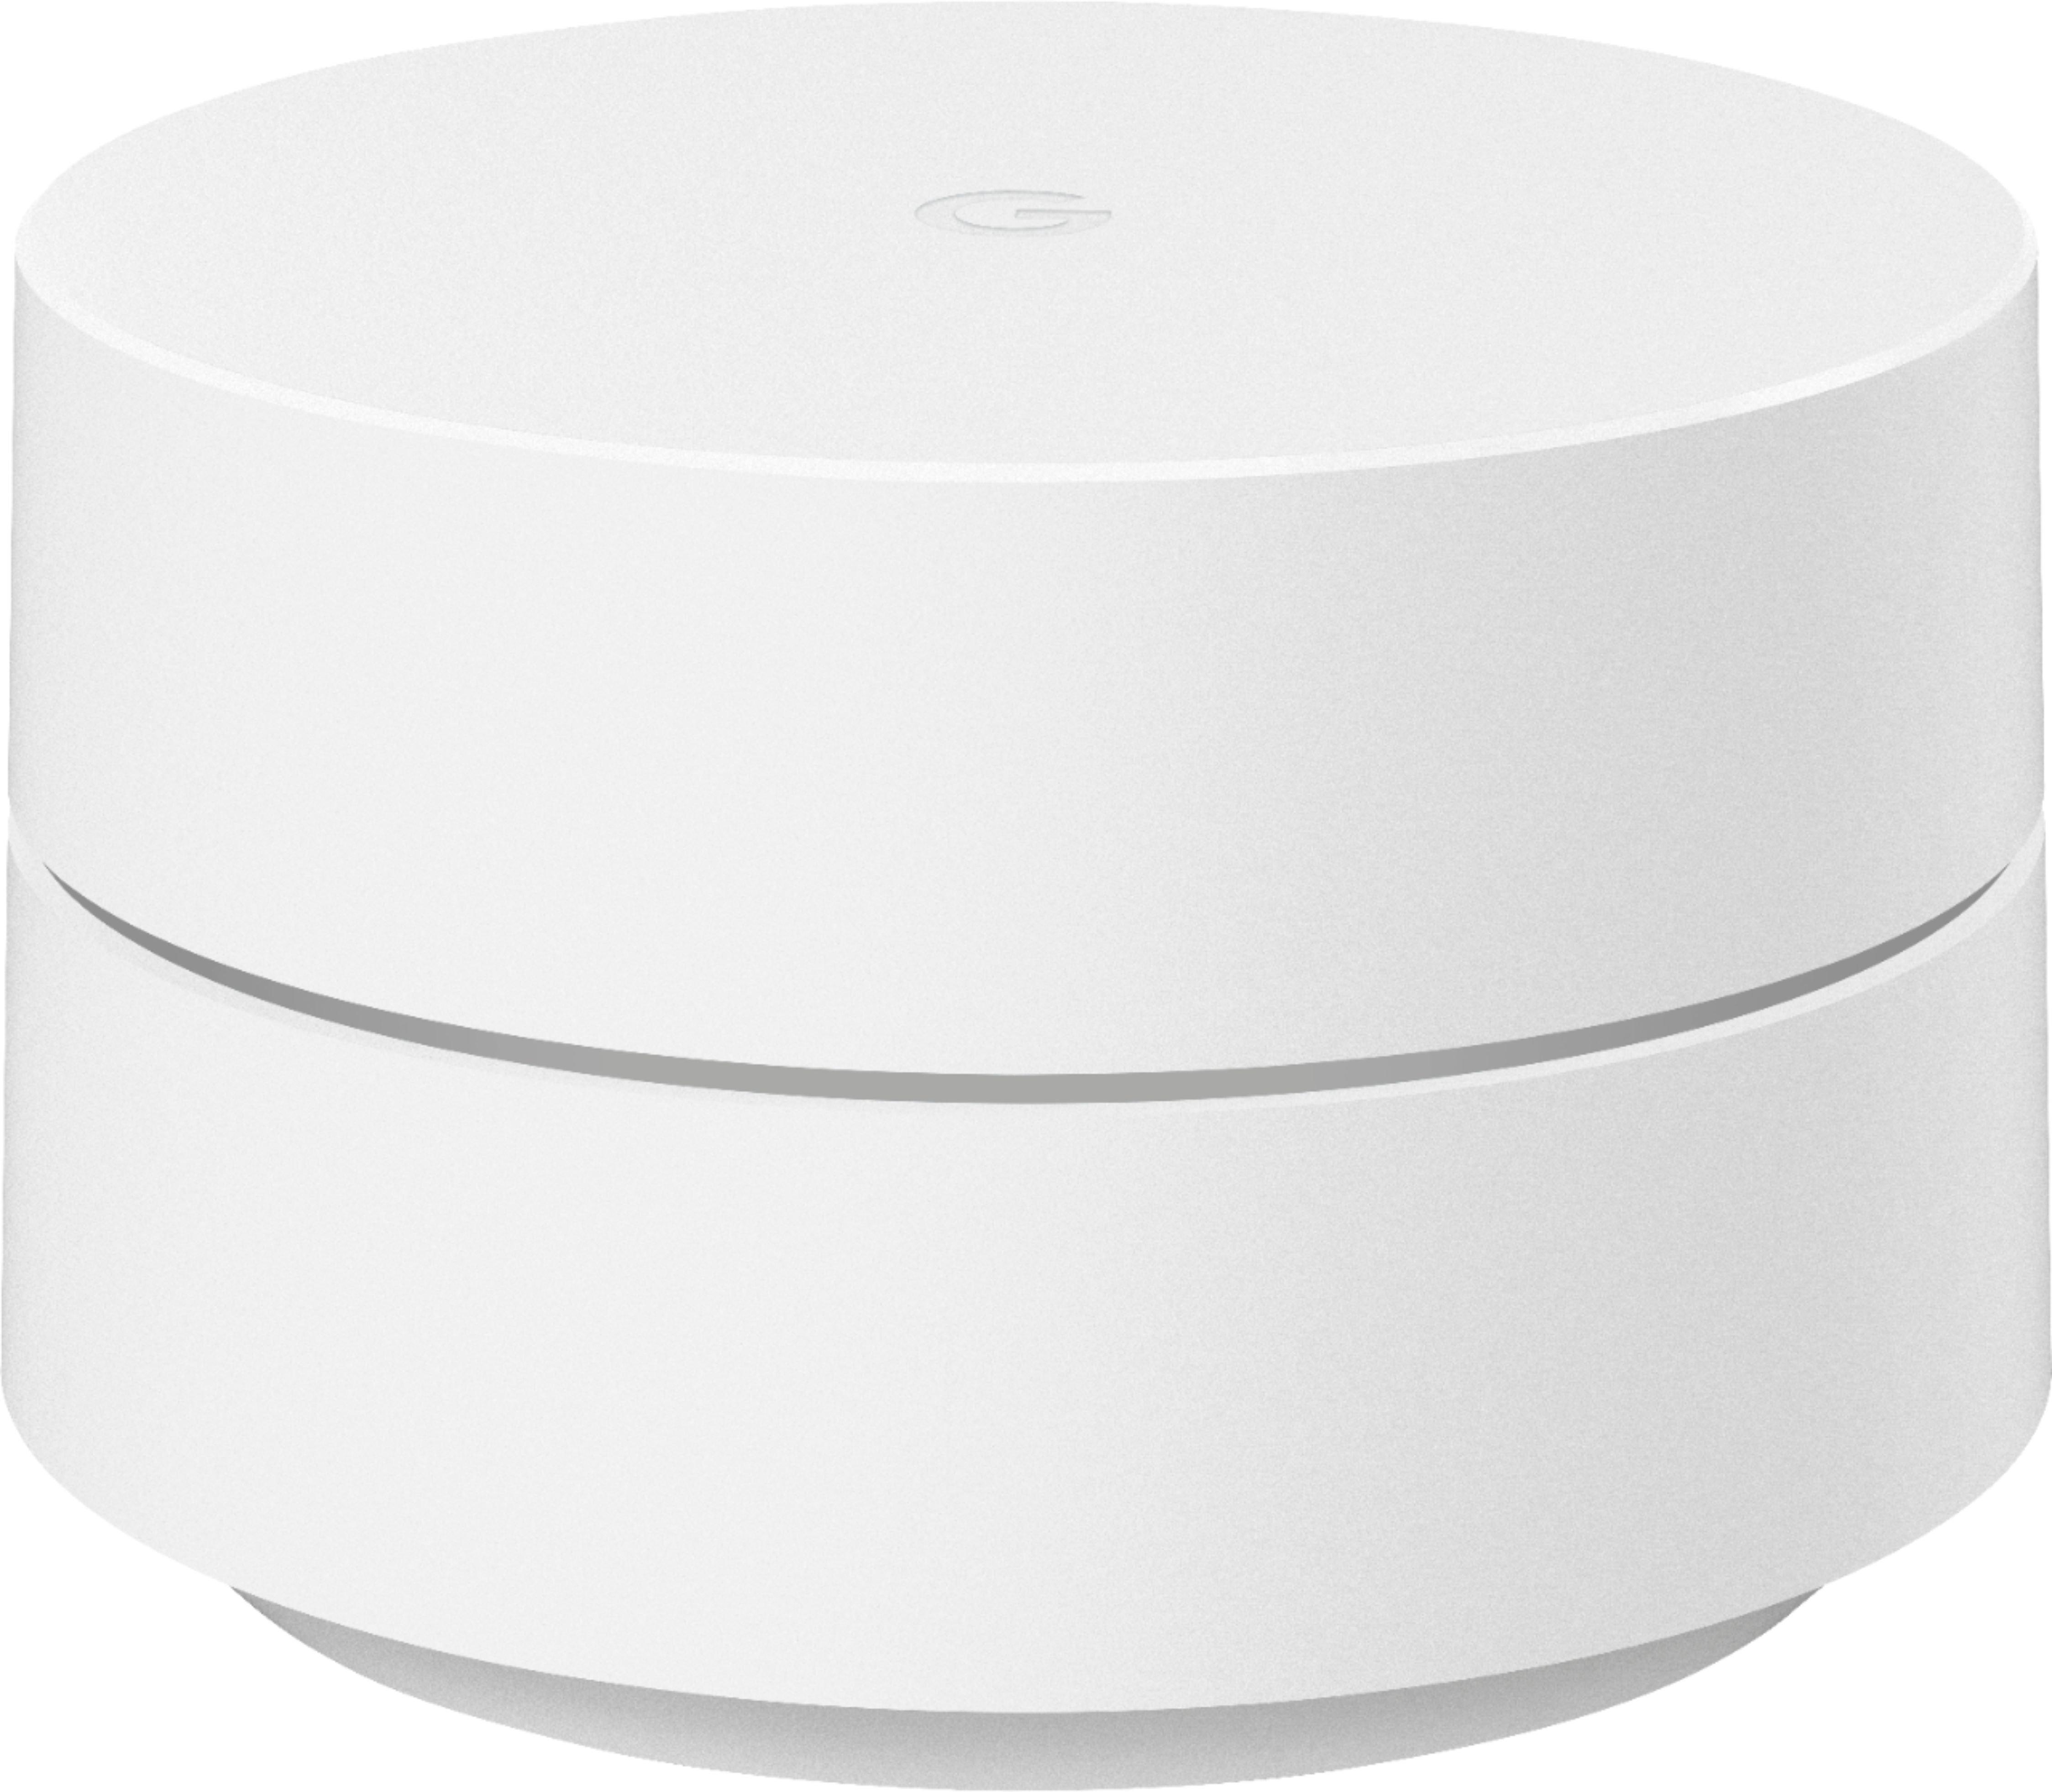 list item 1 of 7 Google Nest AC1200 Whole Home WiFi System 1 Pack